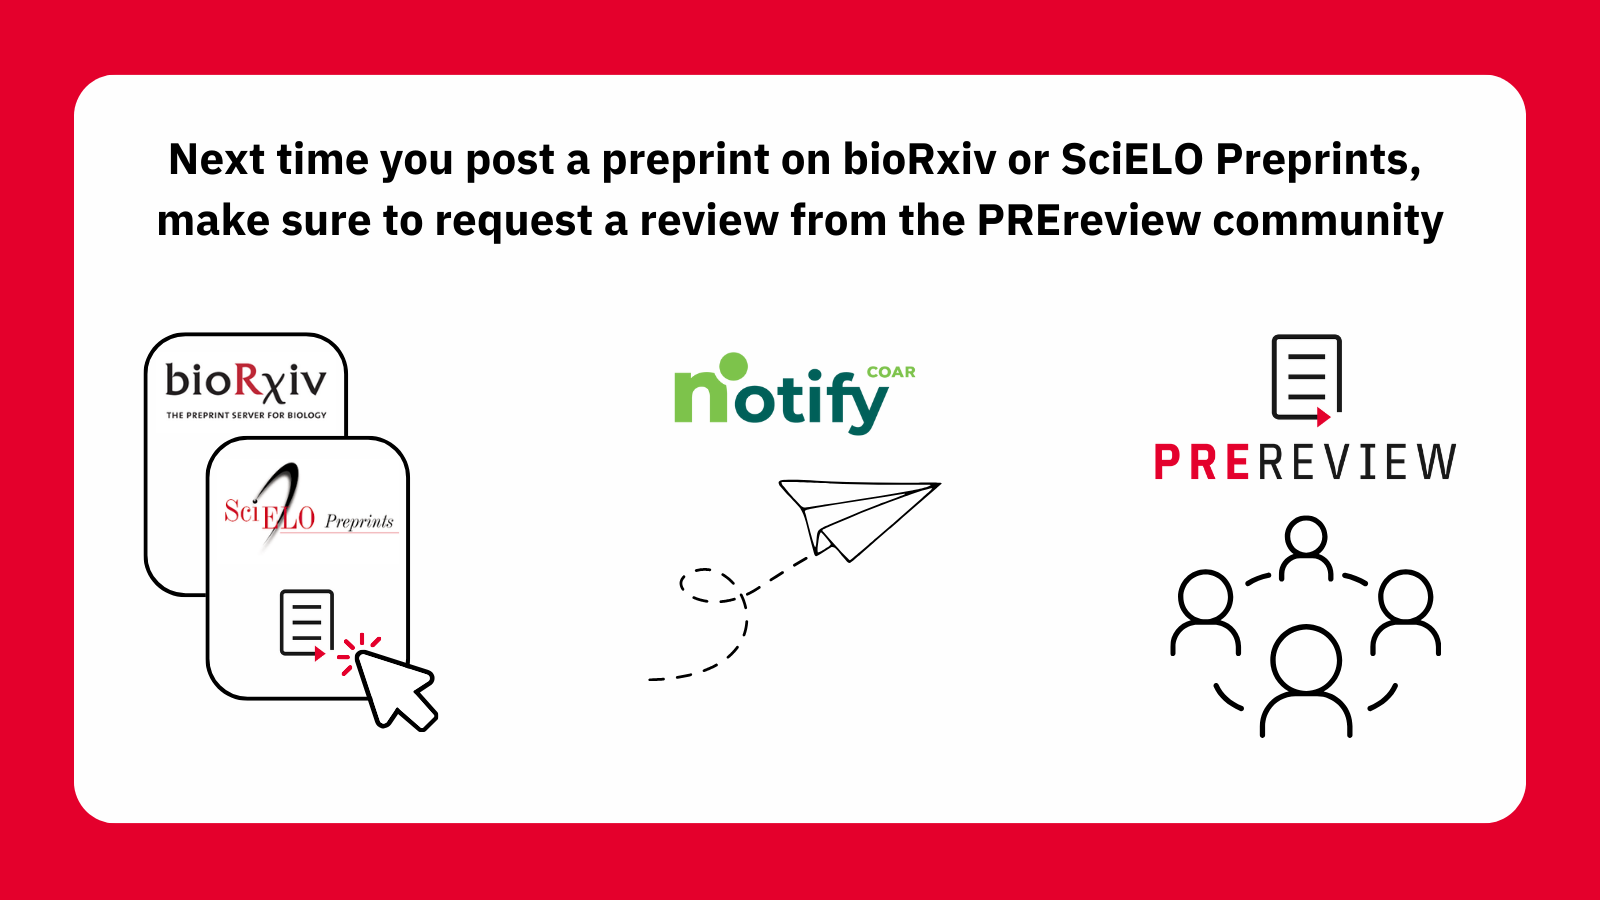 A graphic representing requests for reviews moving from bioRxiv and SciELO Preprints to PREreview through the COAR Notify Protocol